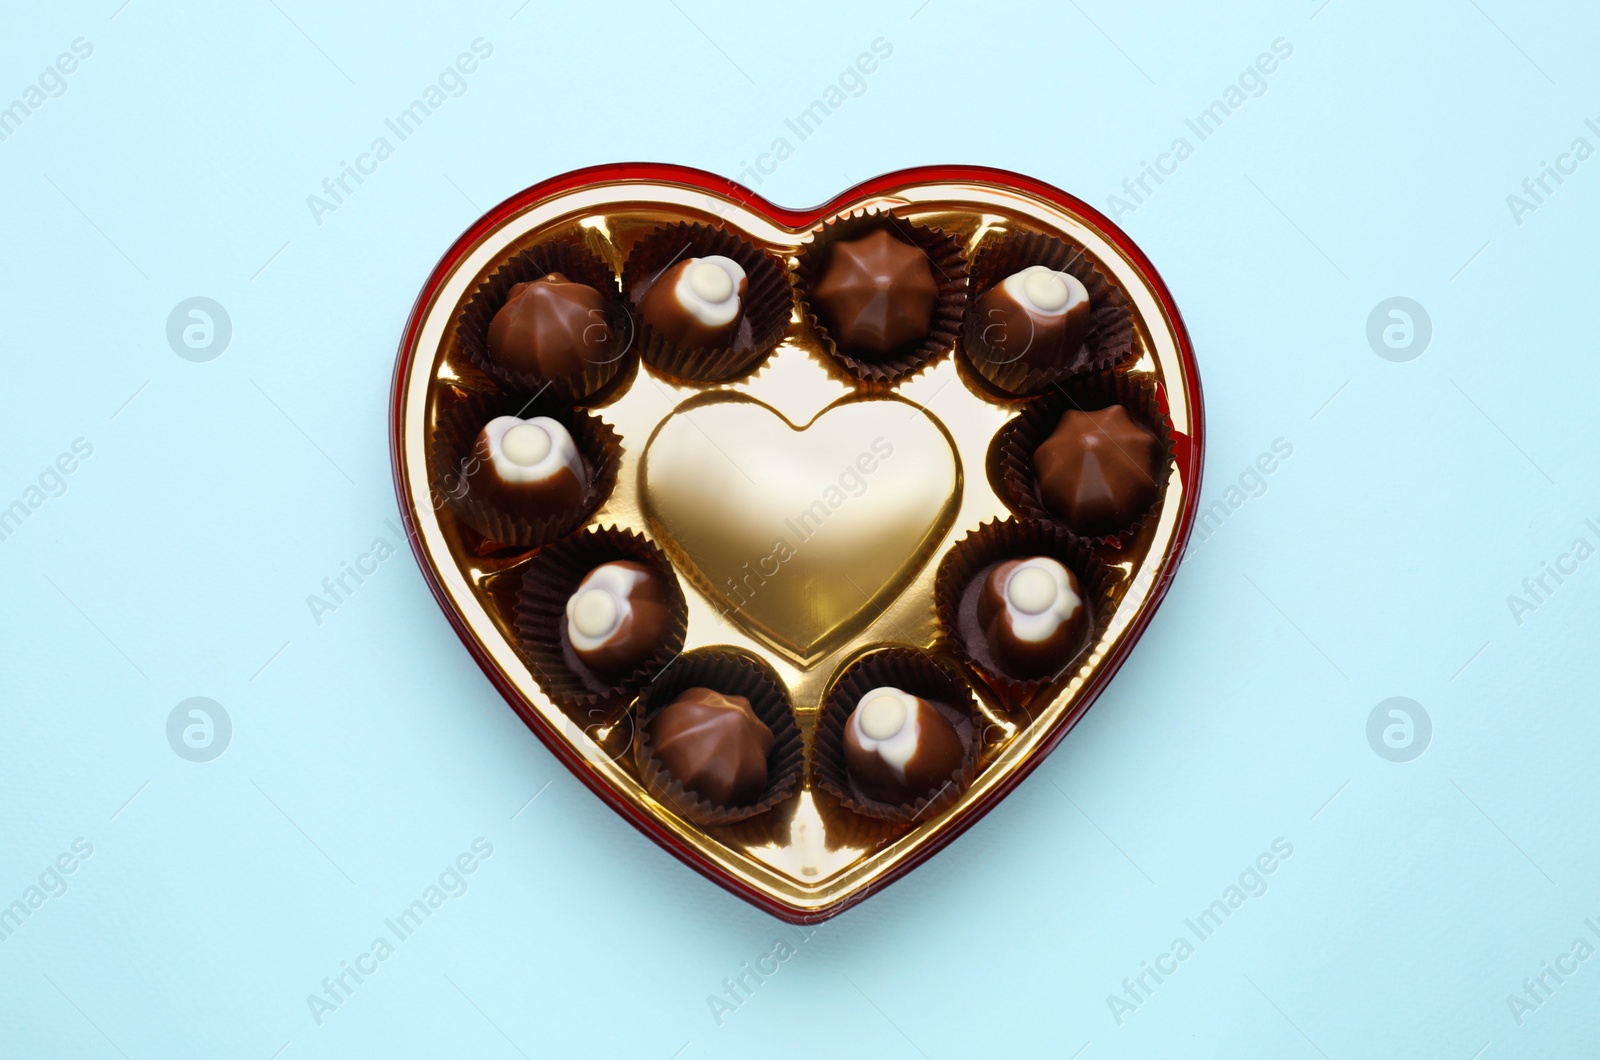 Photo of Heart shaped box with delicious chocolate candies on light blue background, top view